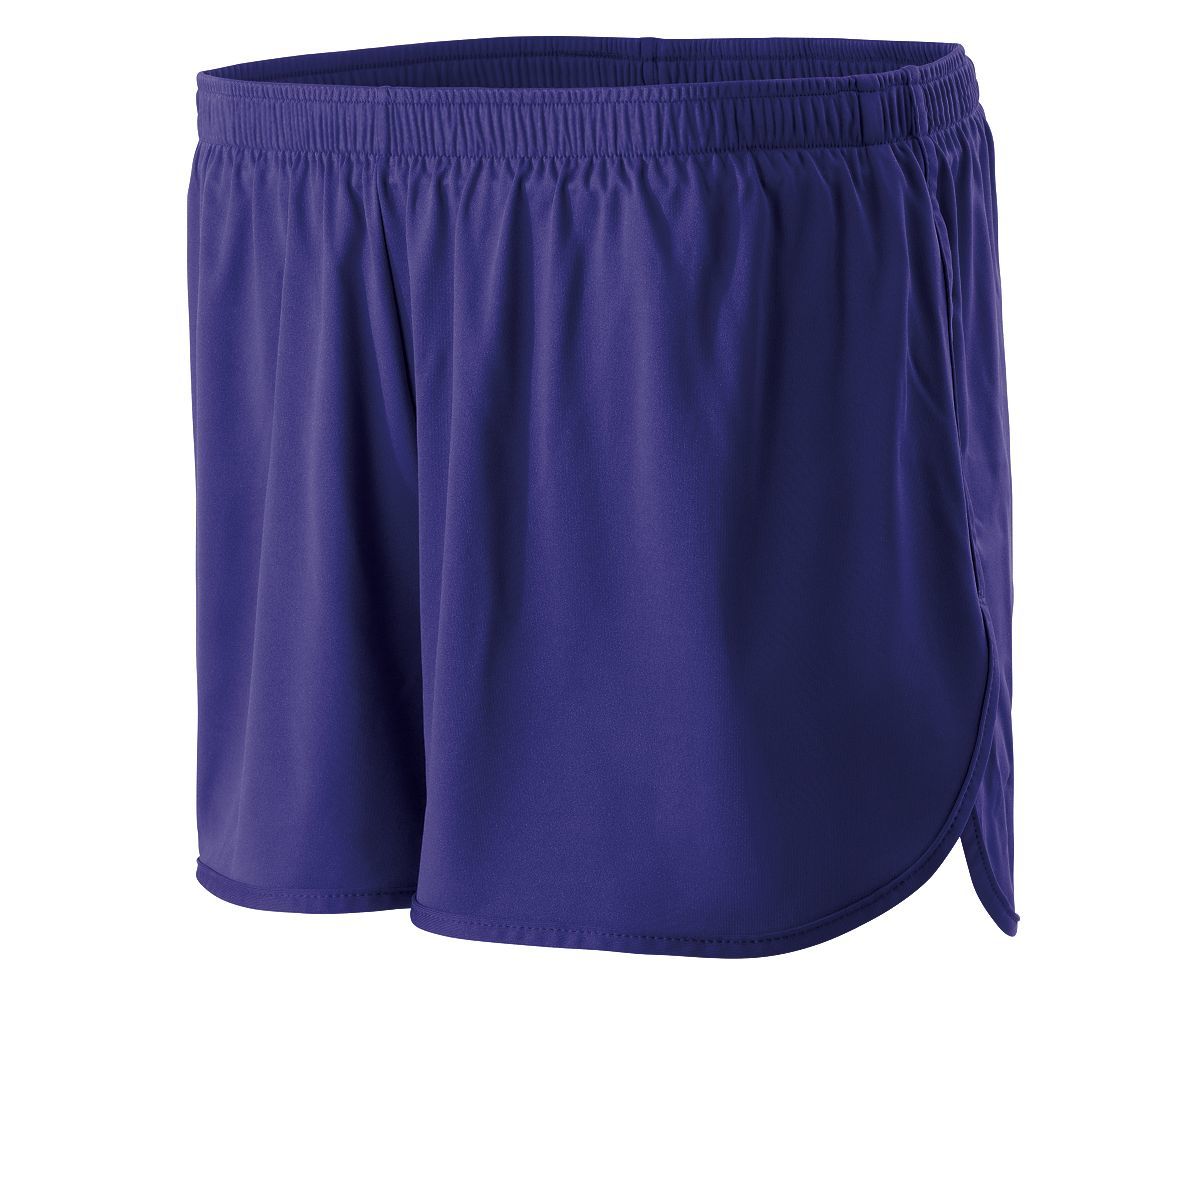 Holloway Anchor Shorts in Purple  -Part of the Adult, Adult-Shorts, Track-Field, Holloway product lines at KanaleyCreations.com